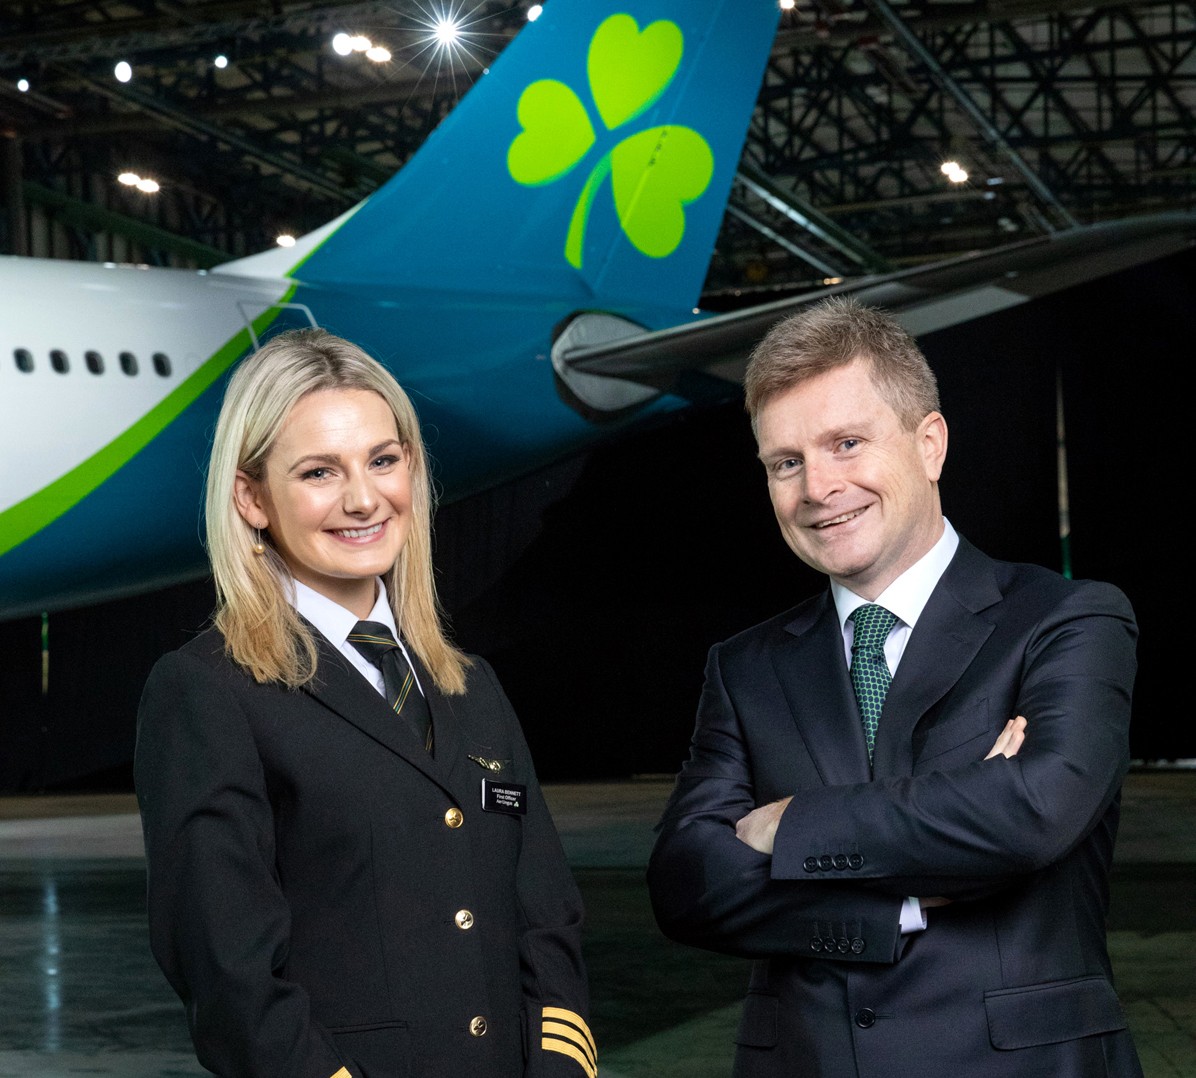 Aer Lingus: The Girl with the Shamrock Tattoo